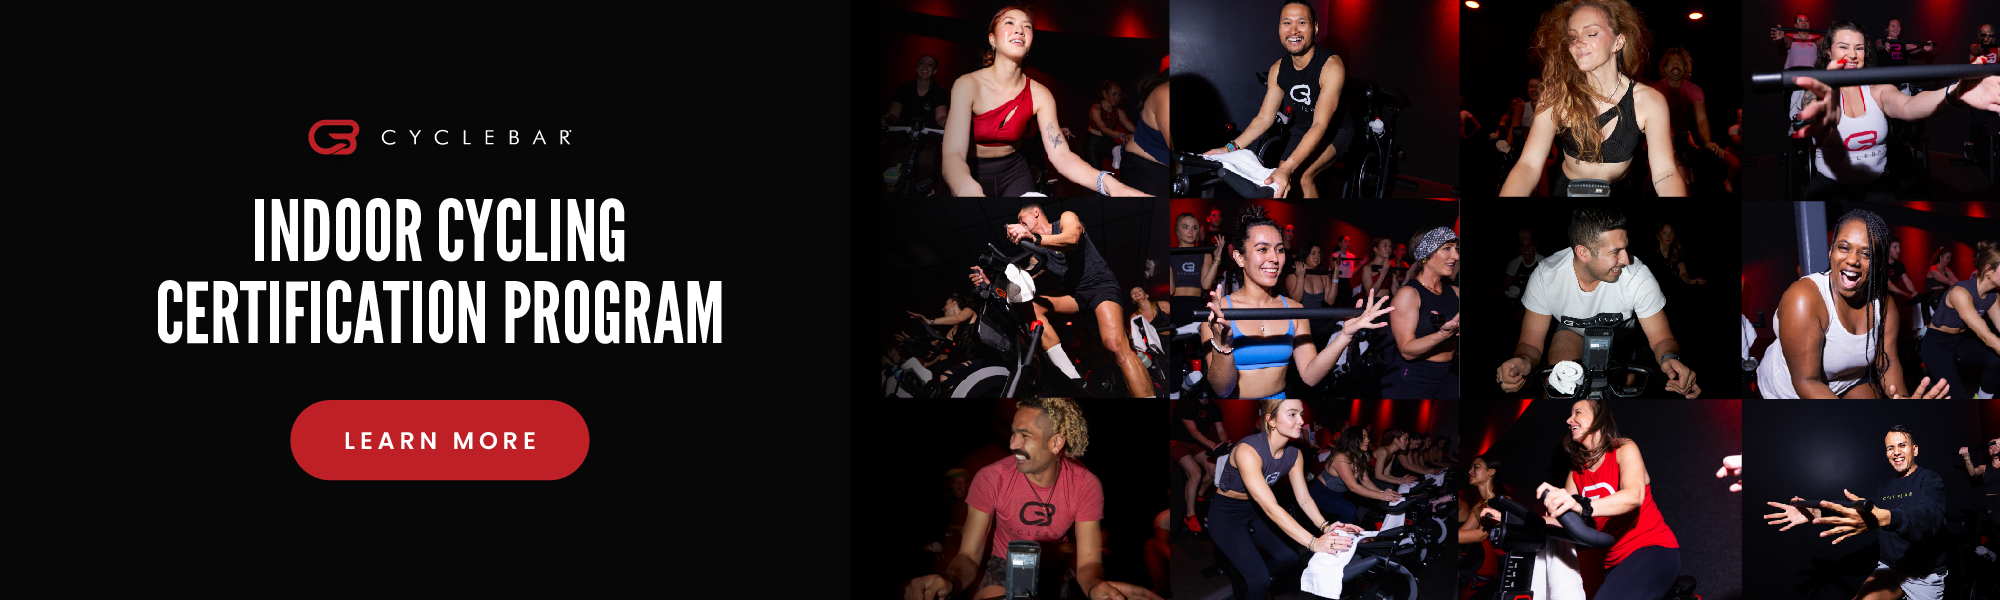 Learn More About CycleBar Indoor Cycling Certification Program 